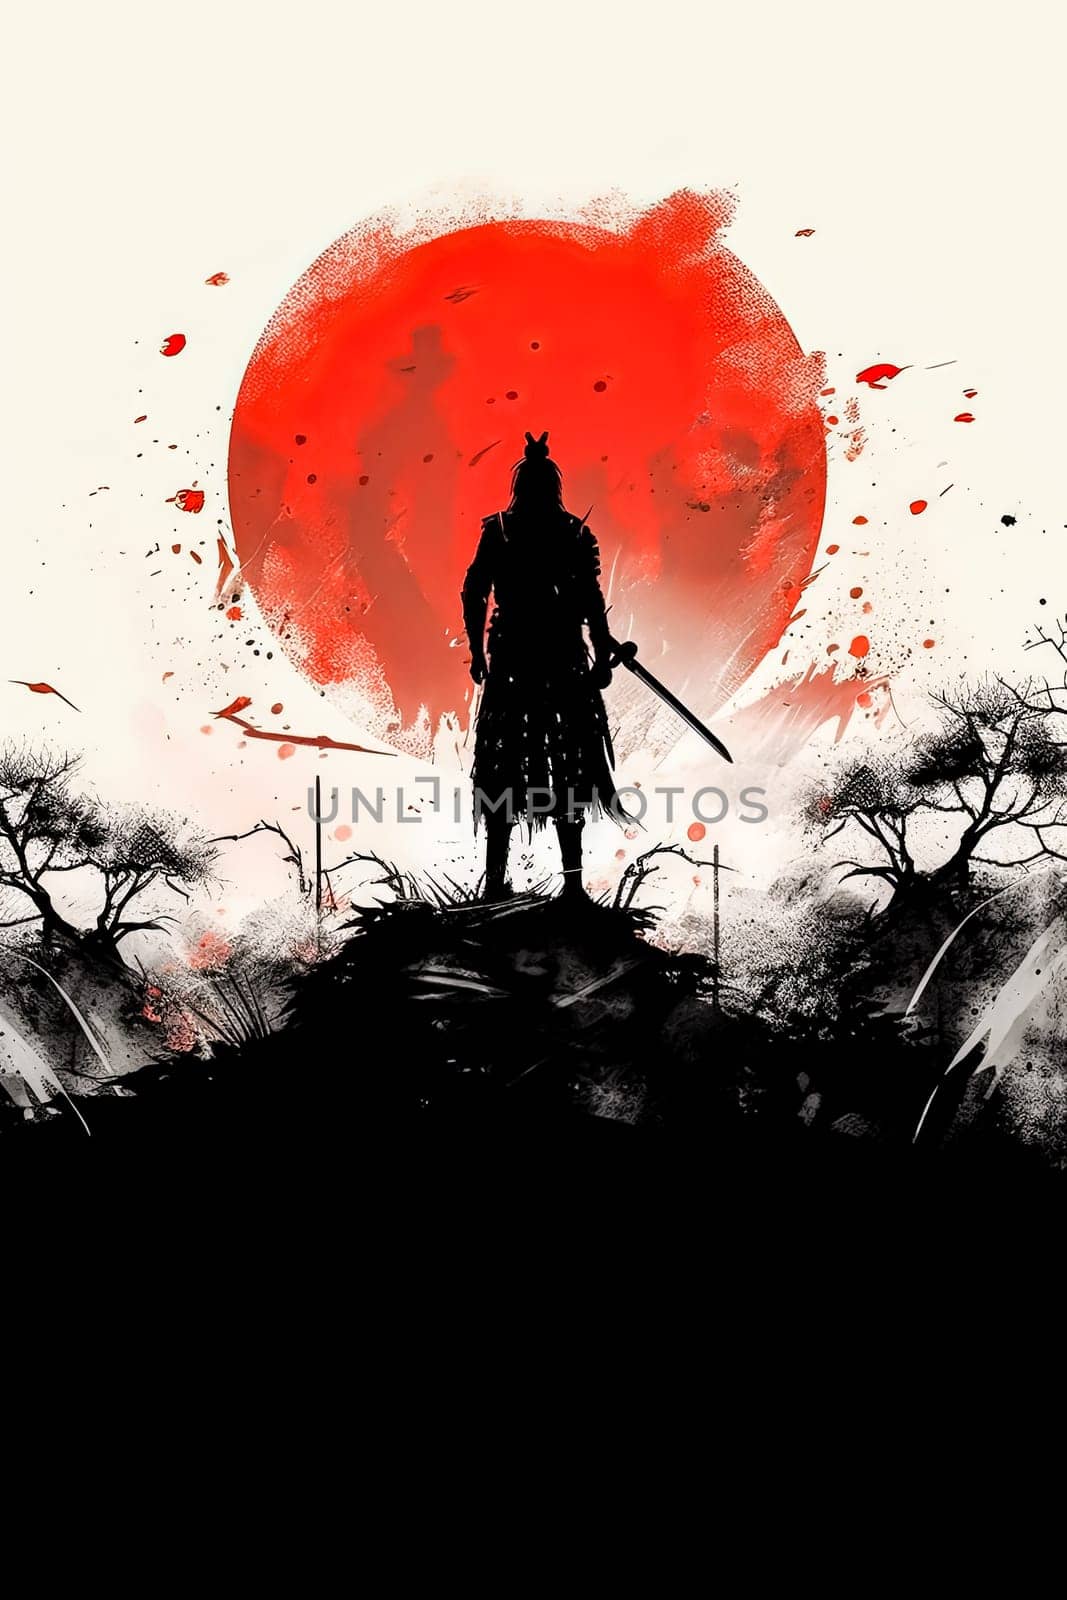 A man in black is holding a sword and standing in front of a red circle. The image has a dark and intense mood, with the red background and the man's menacing pose